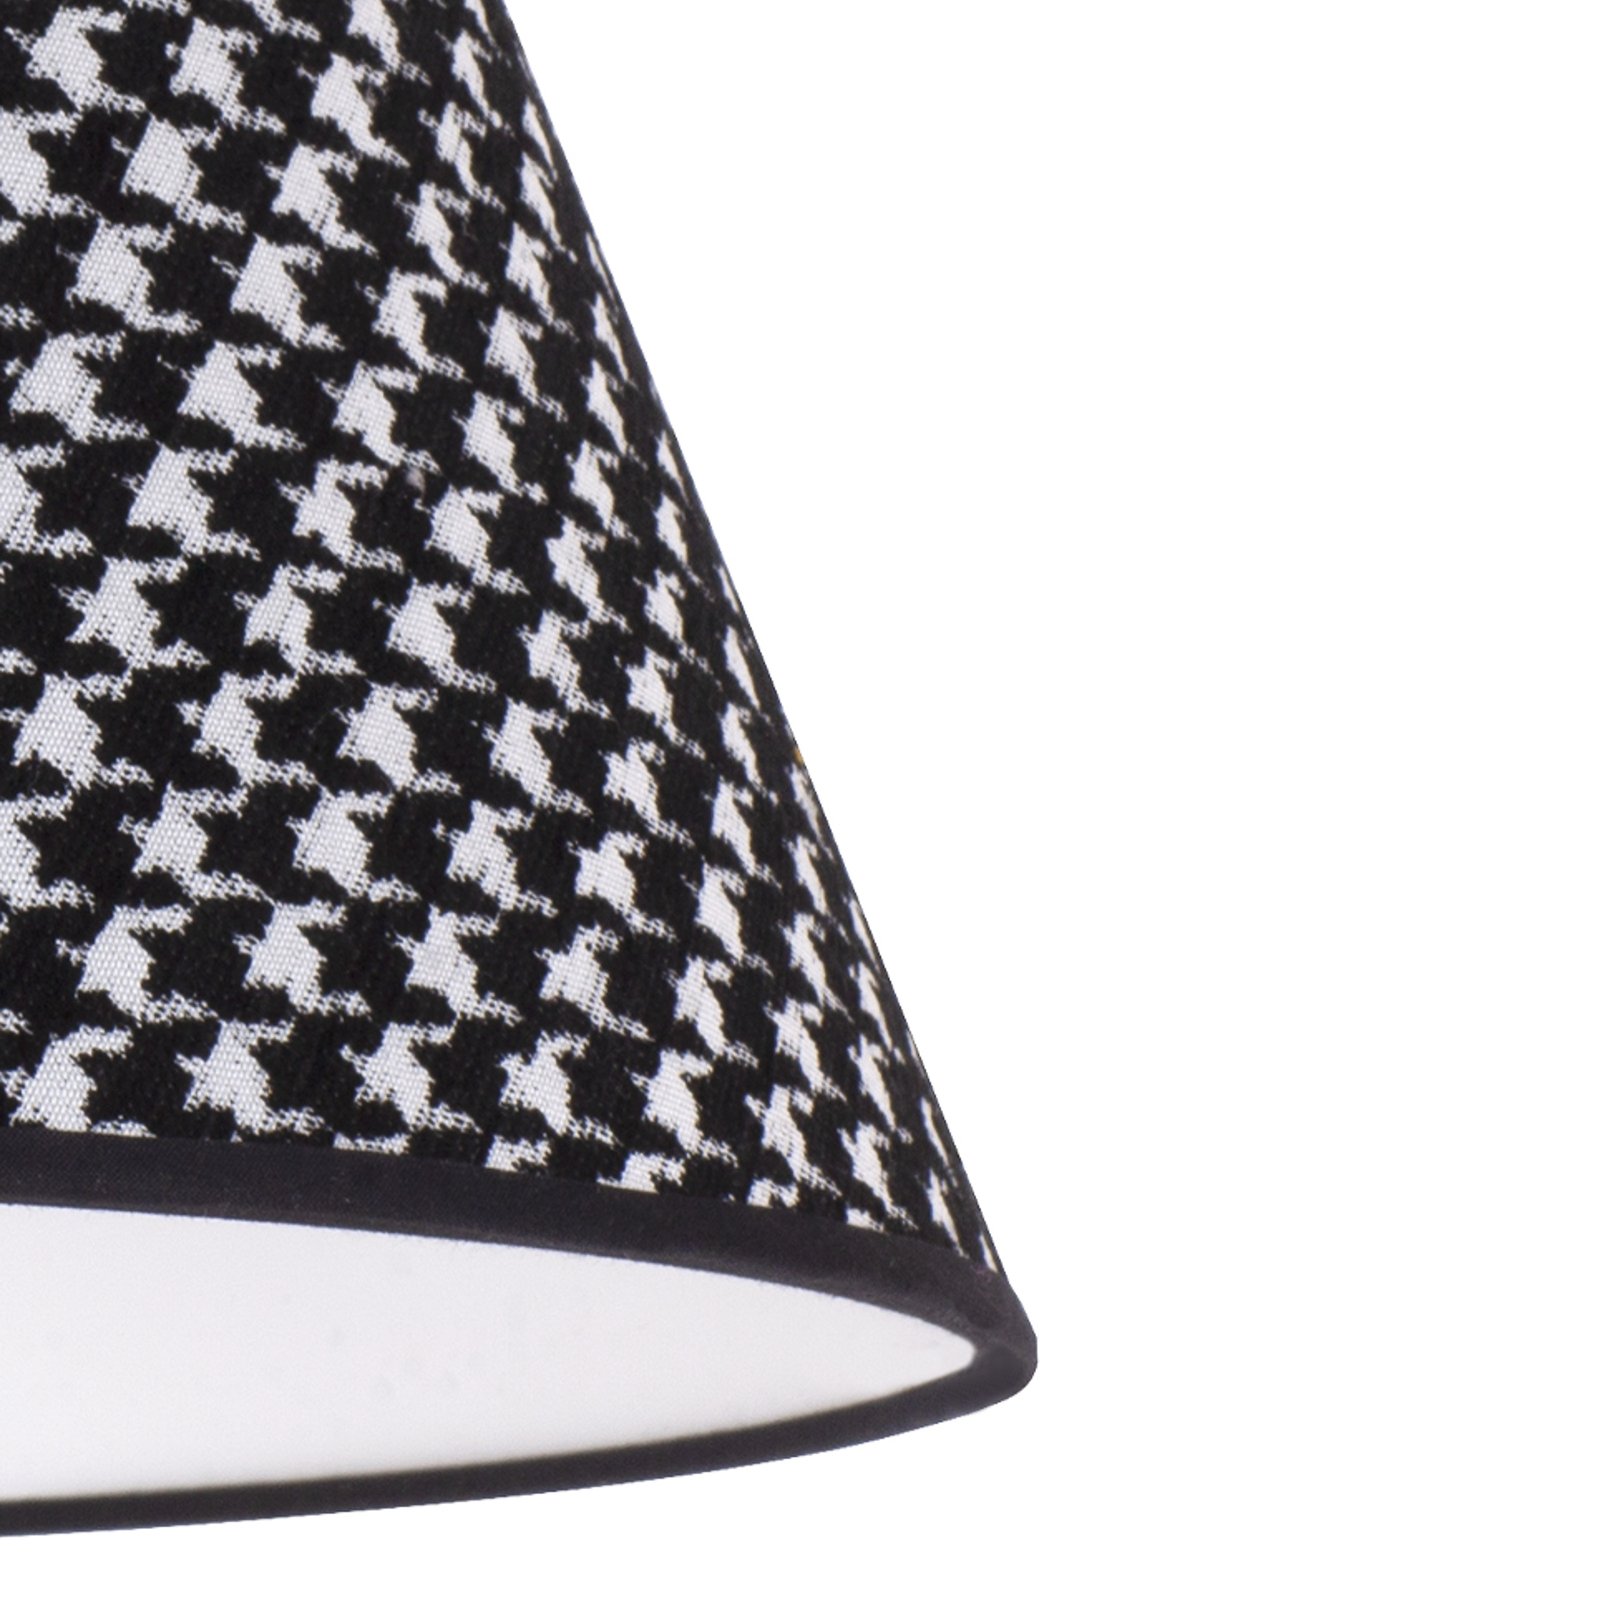 Sofia lampshade 26cm, houndstooth pattern black